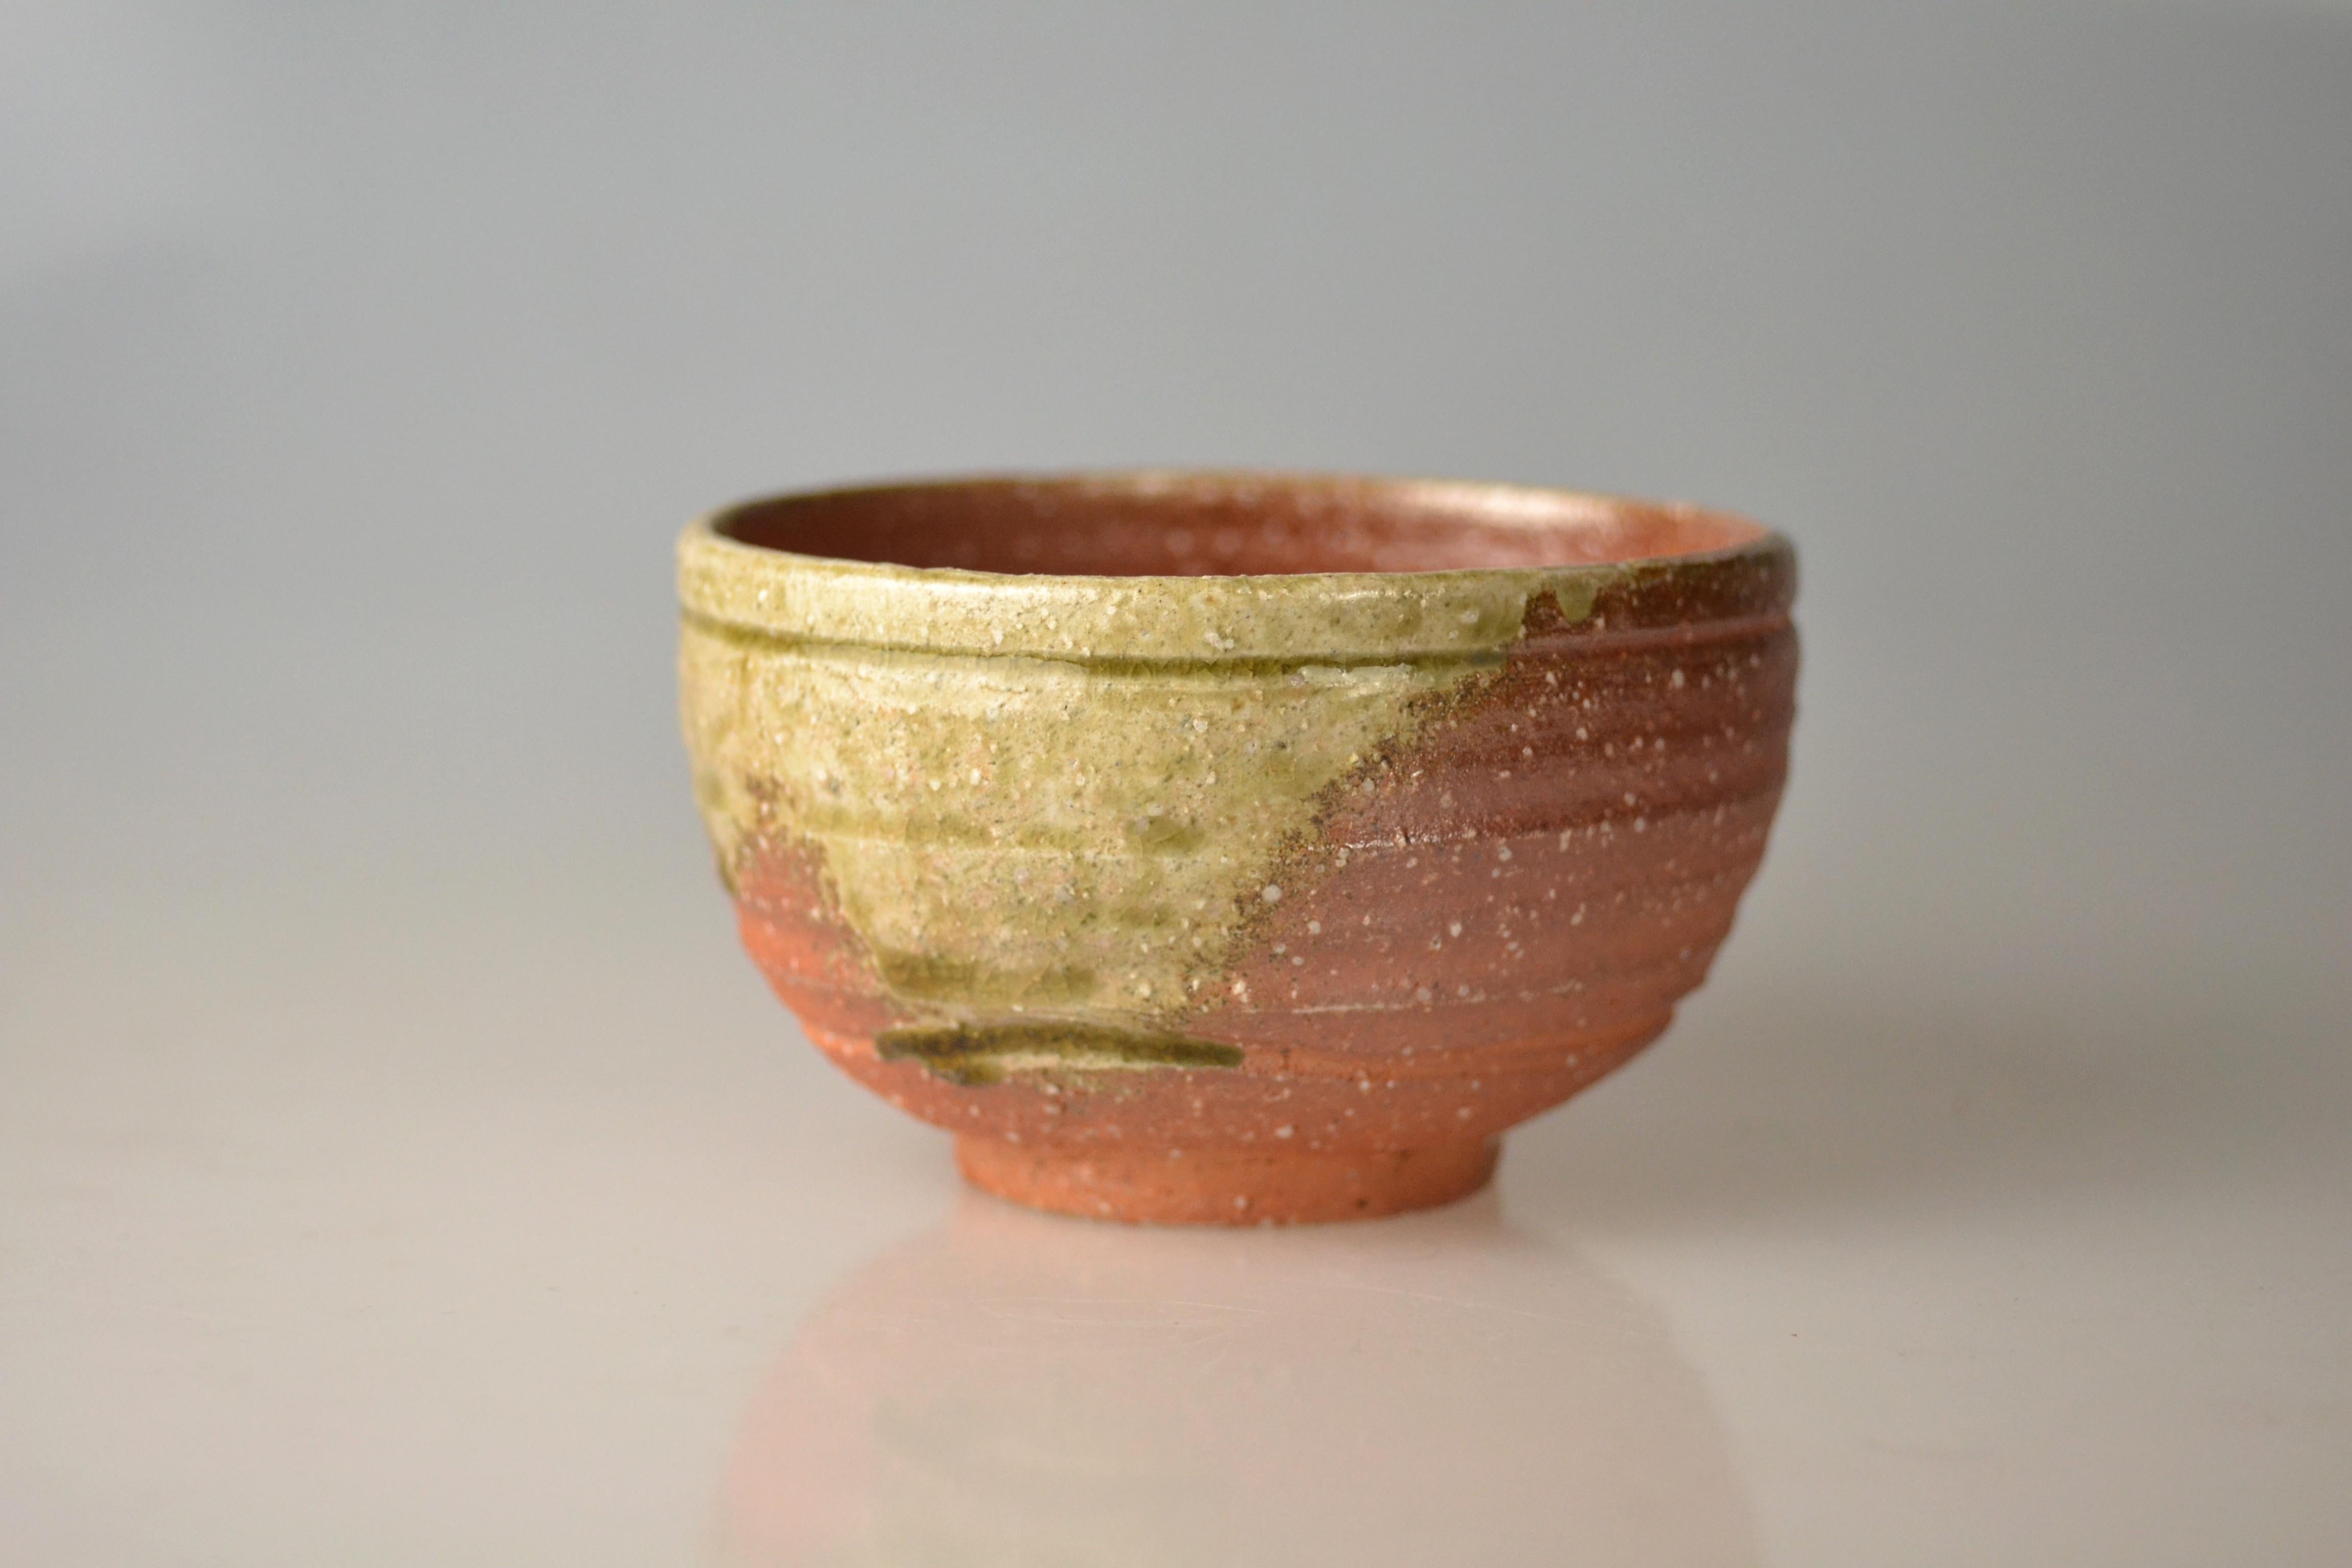 Traditional, hand-thrown tea bowl for matcha with ash glaze from wood firing. Takahashi Rakusai IV (1925) is one of Japan's grand masters of traditional pottery who specialized within his family business on Shigaraki ware. Shigaraki ware is a sandy